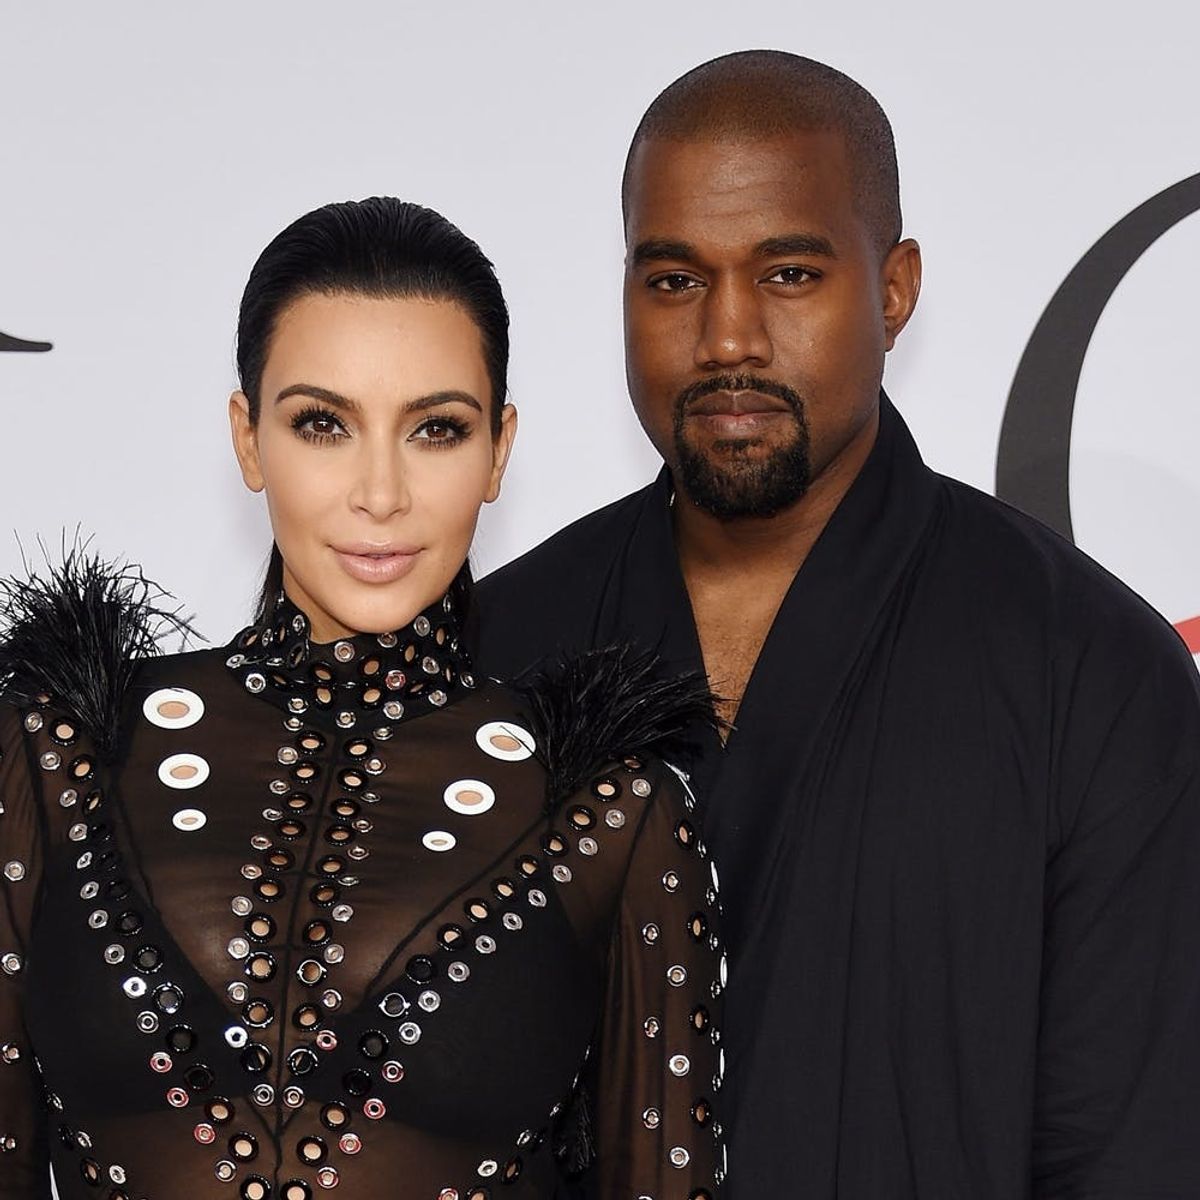 Fans Are Suggesting Names for Kim Kardashian West’s New Baby and They’re Amazing